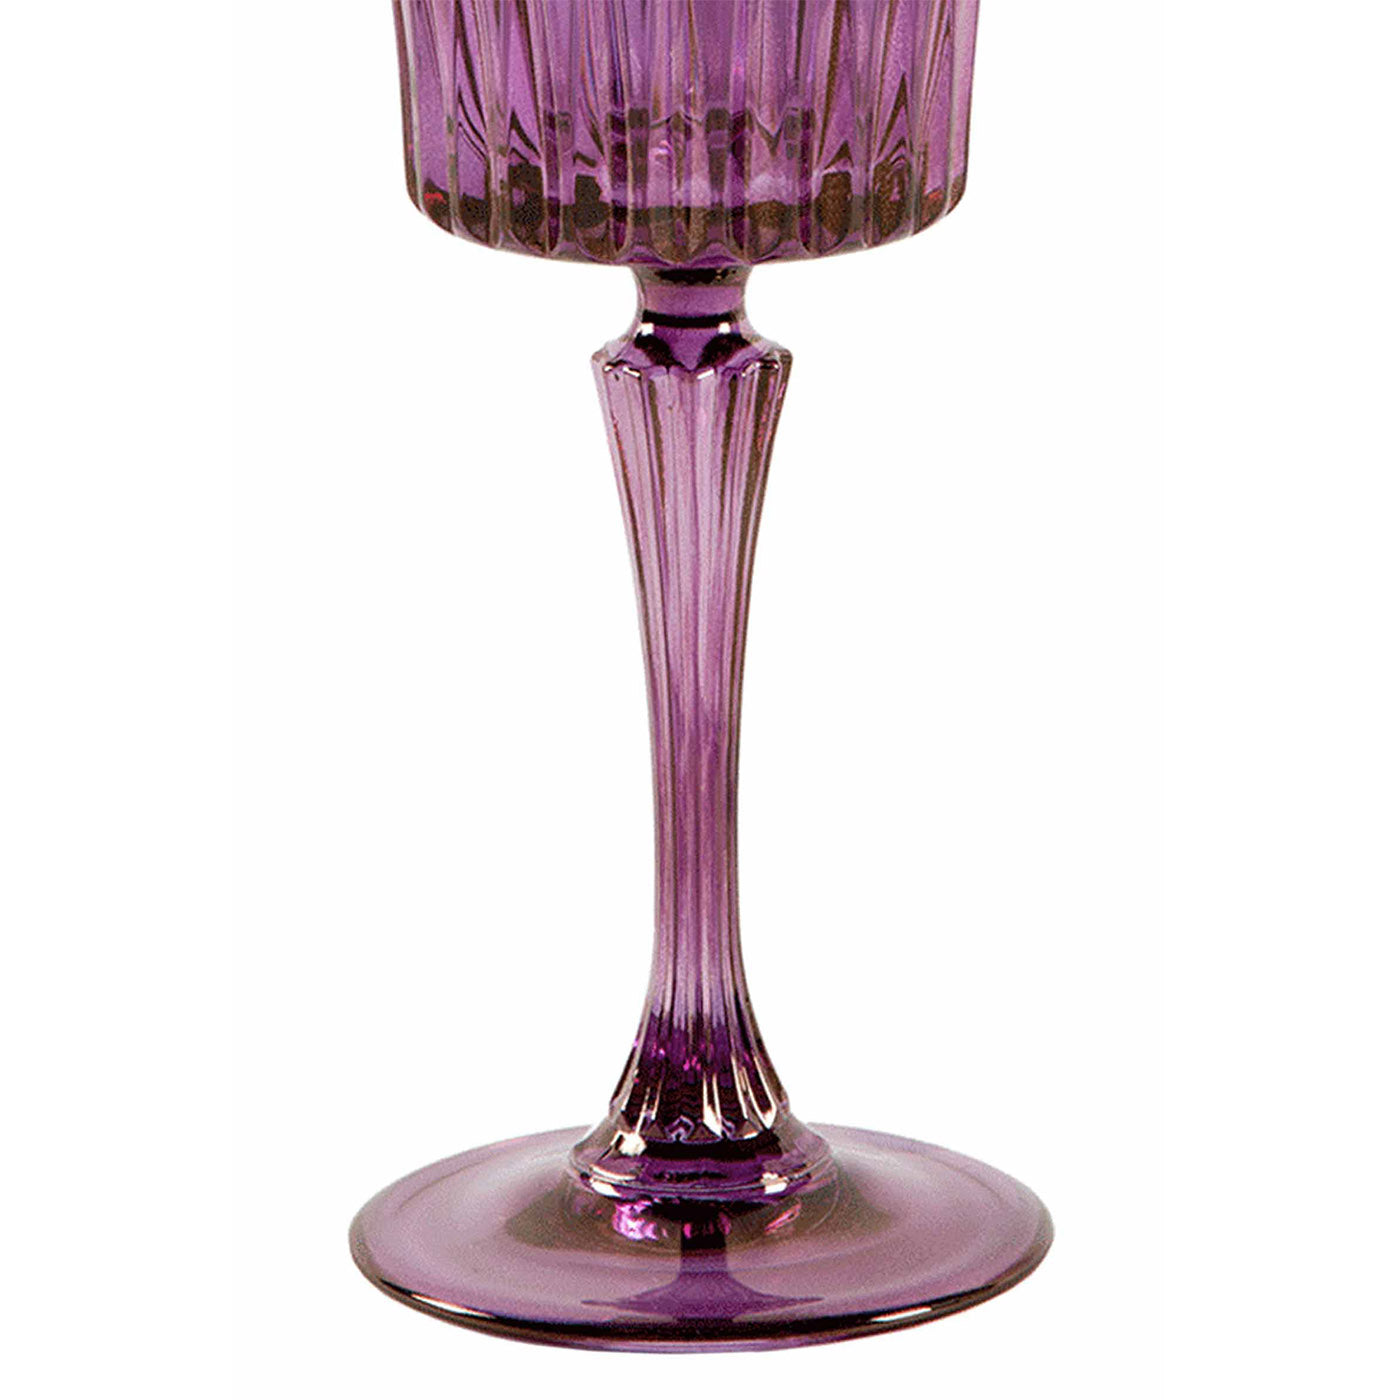 Domina Set of 2 Purple-To-Blue Water Glasses - Alternative view 1